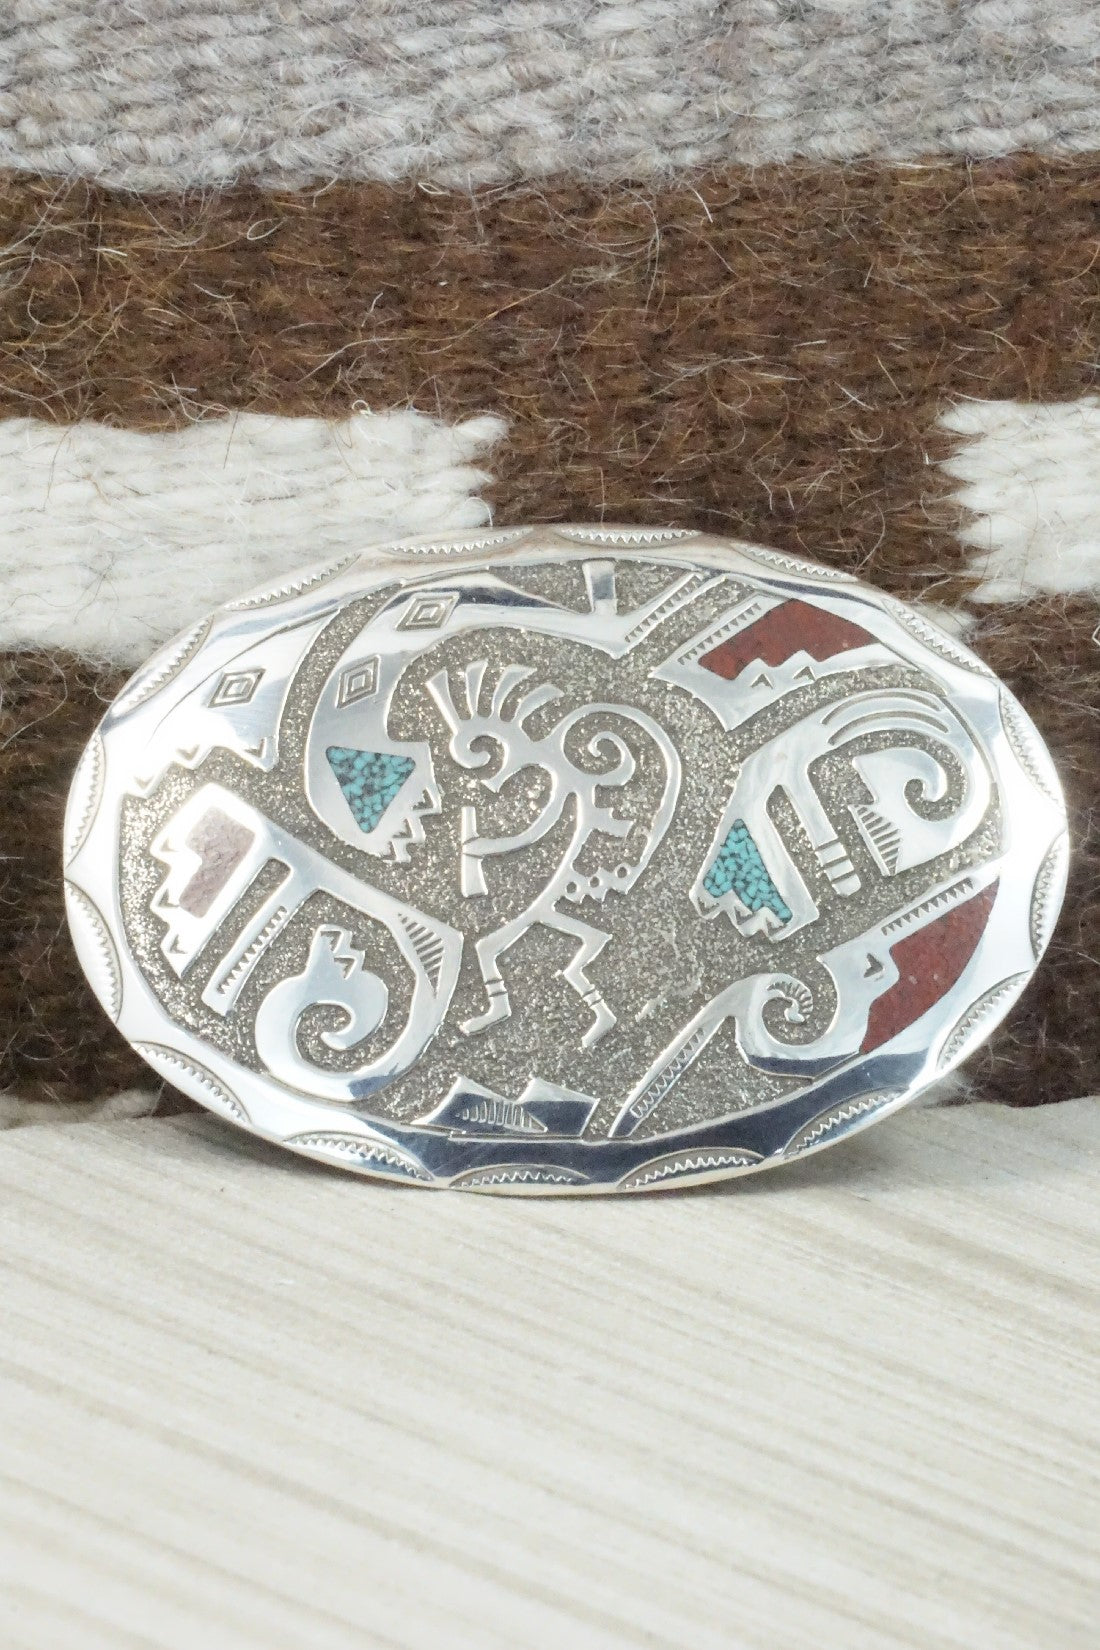 Turquoise, Coral Chip Inlay & Sterling Silver Belt Buckle - Raymond Begay